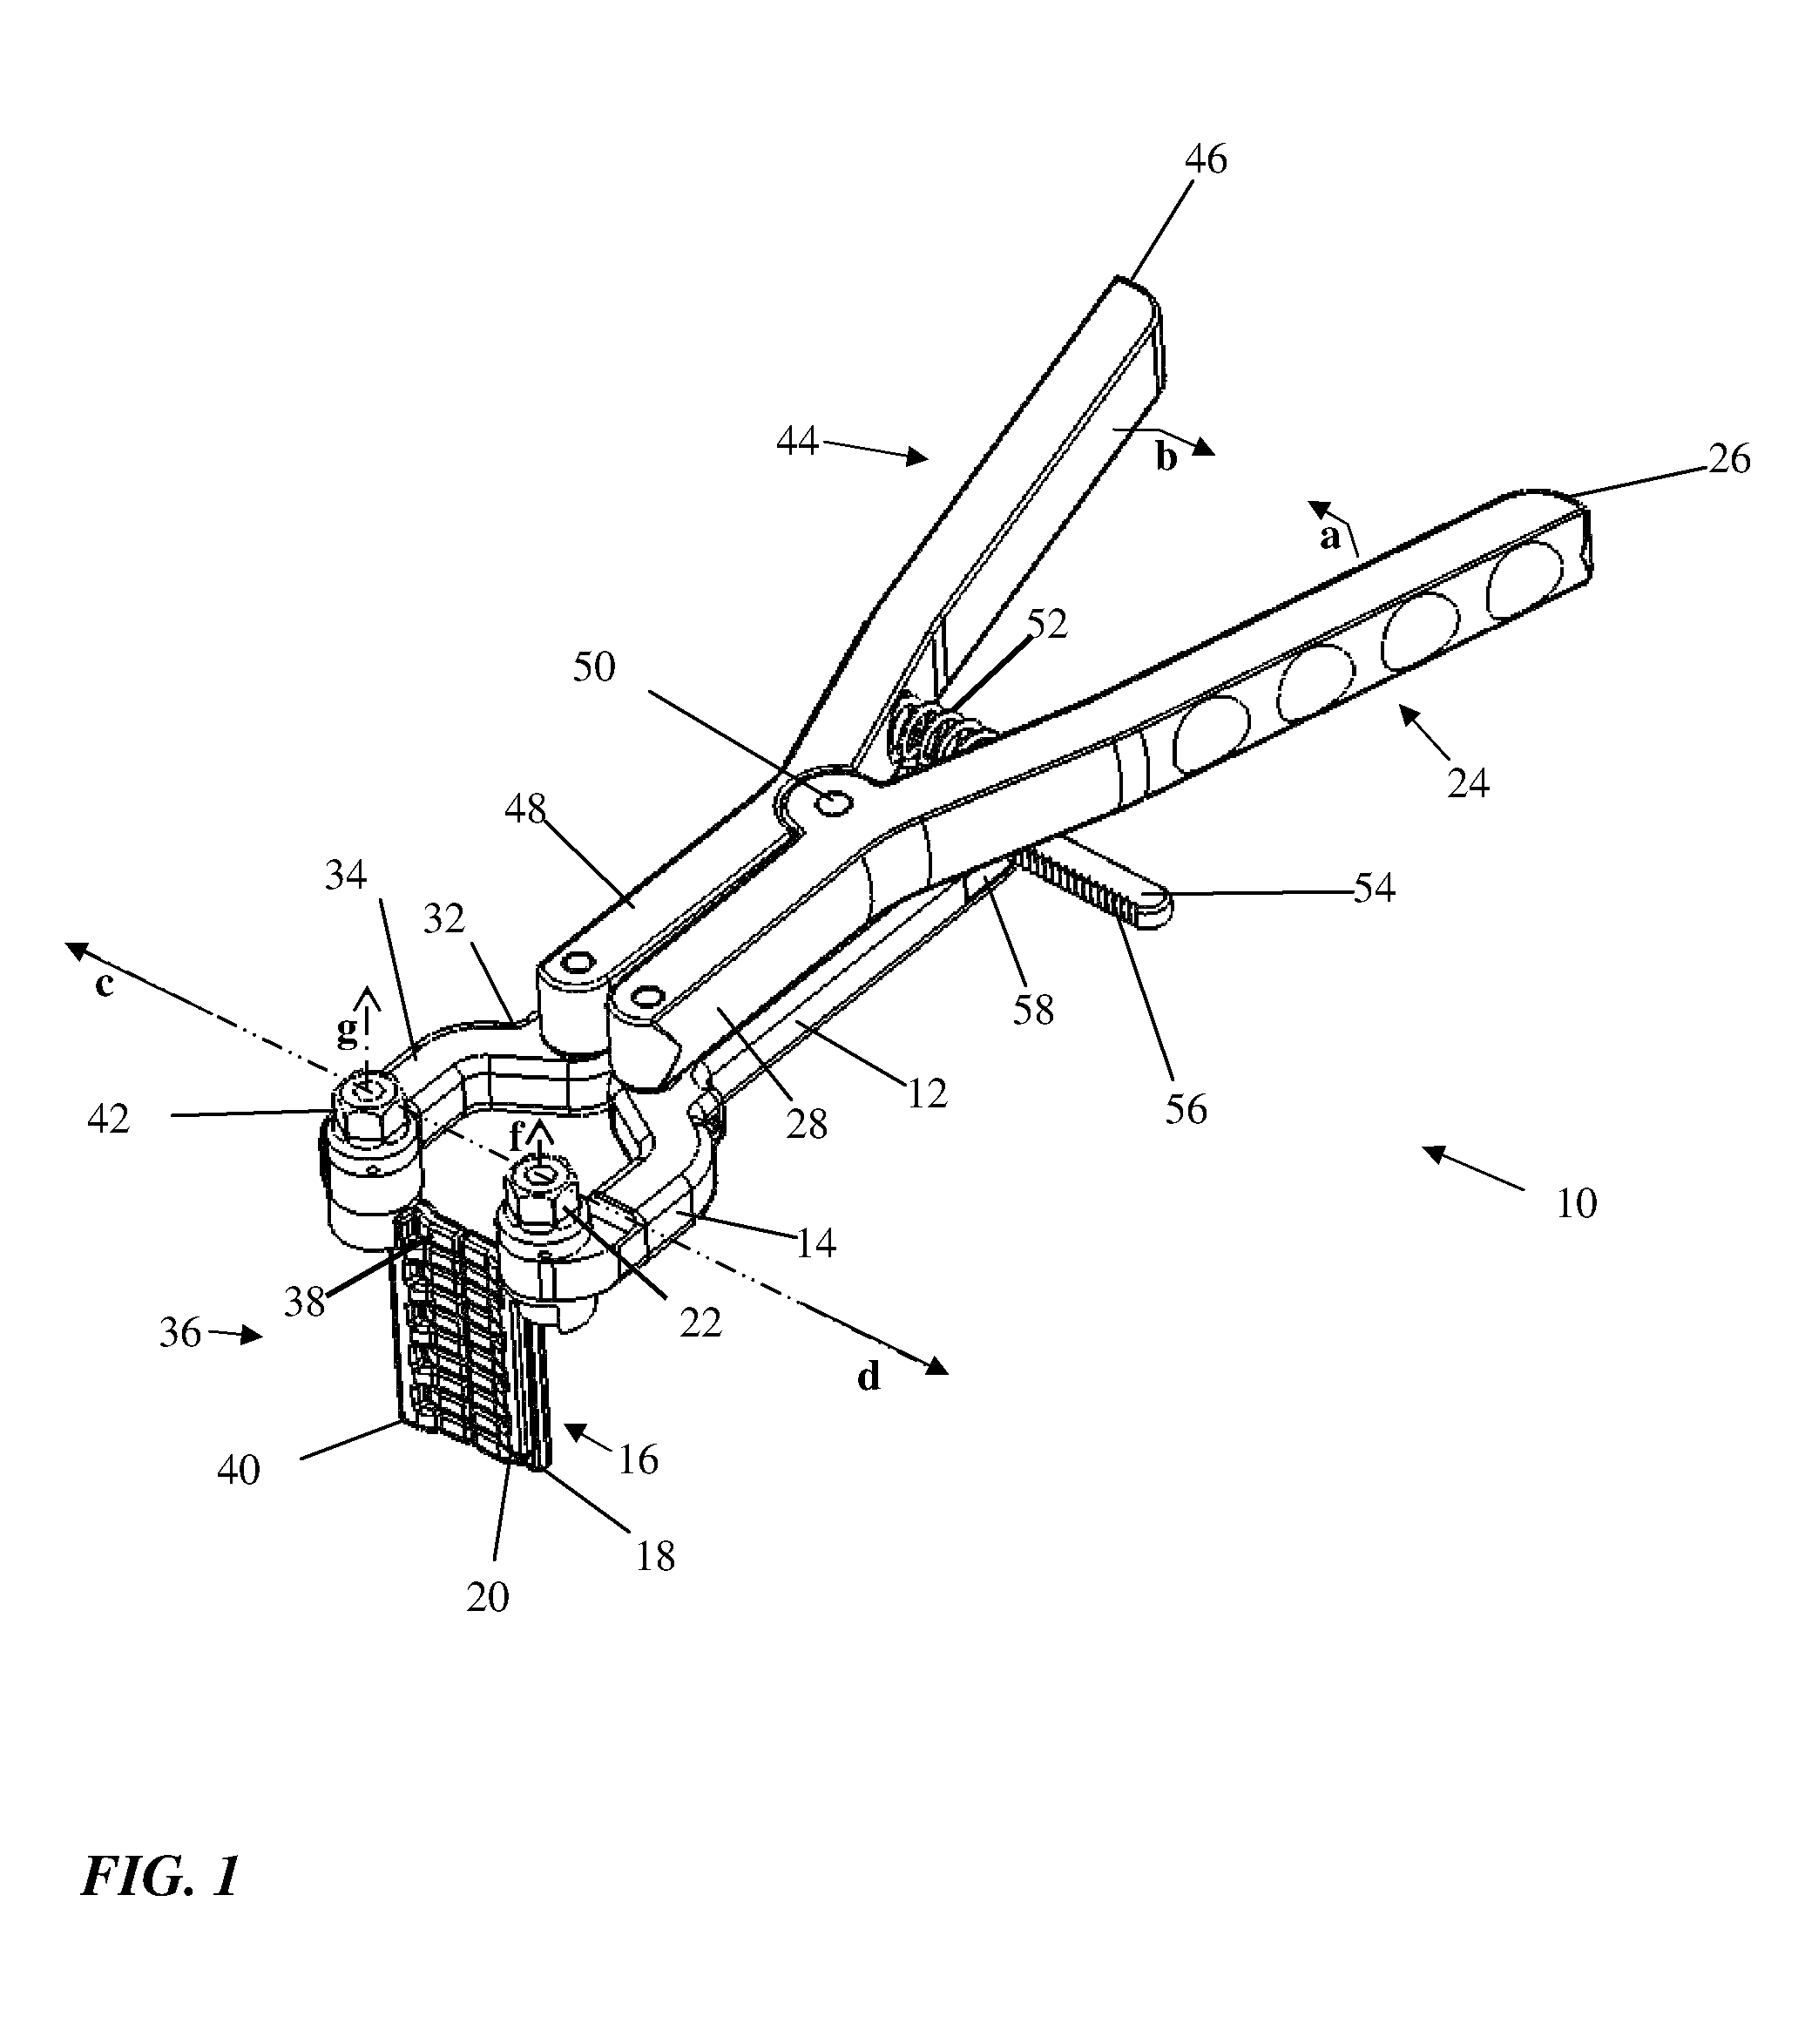 Method of using a surgical tissue retractor